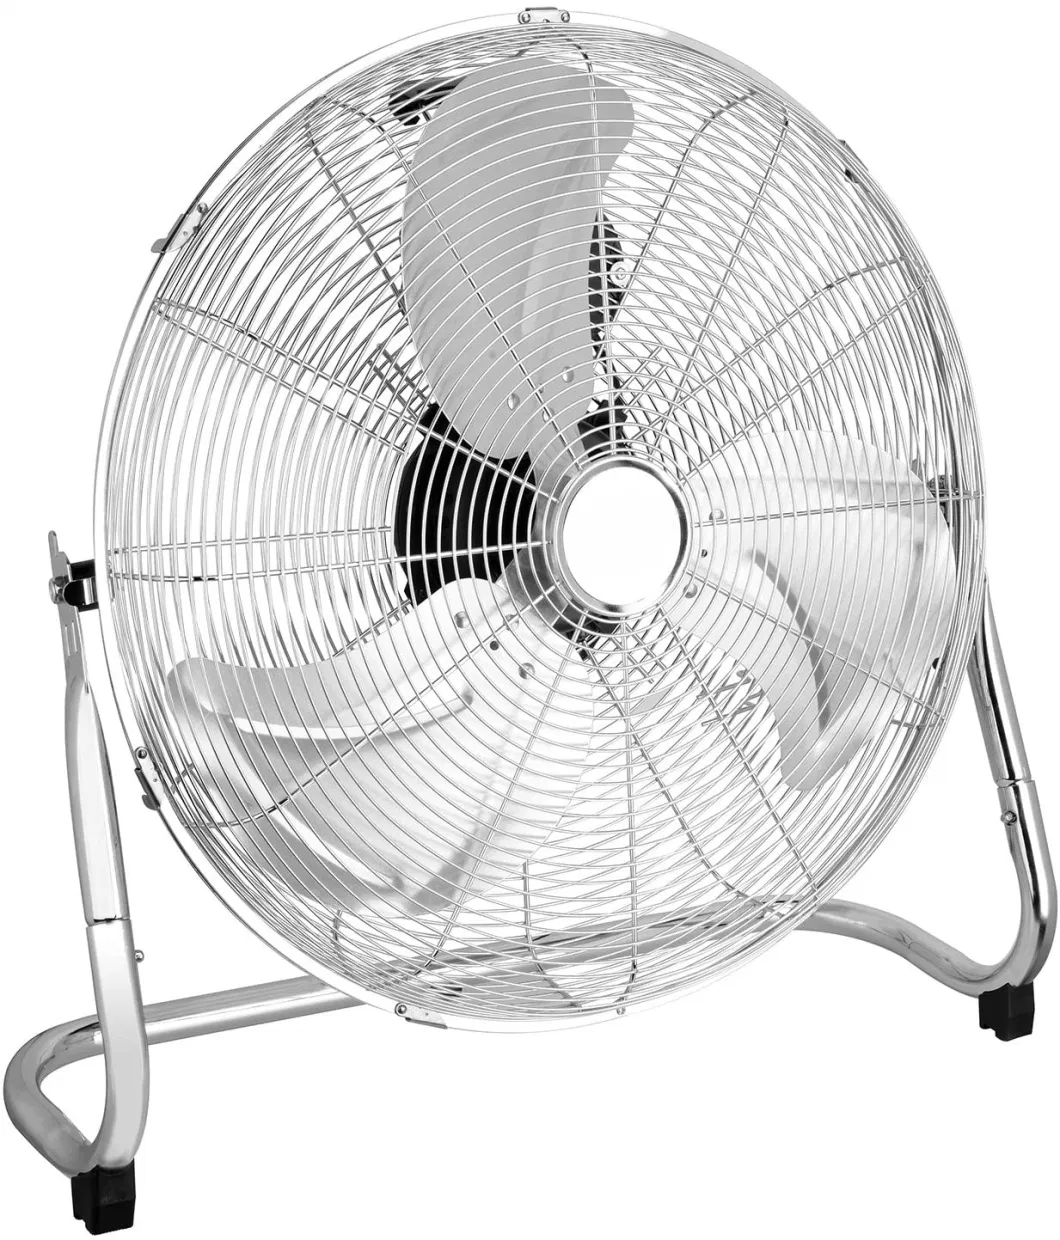 20 Inch Chrome Gym Floor Fan with 3 Speeds and Adjustable Fan Head